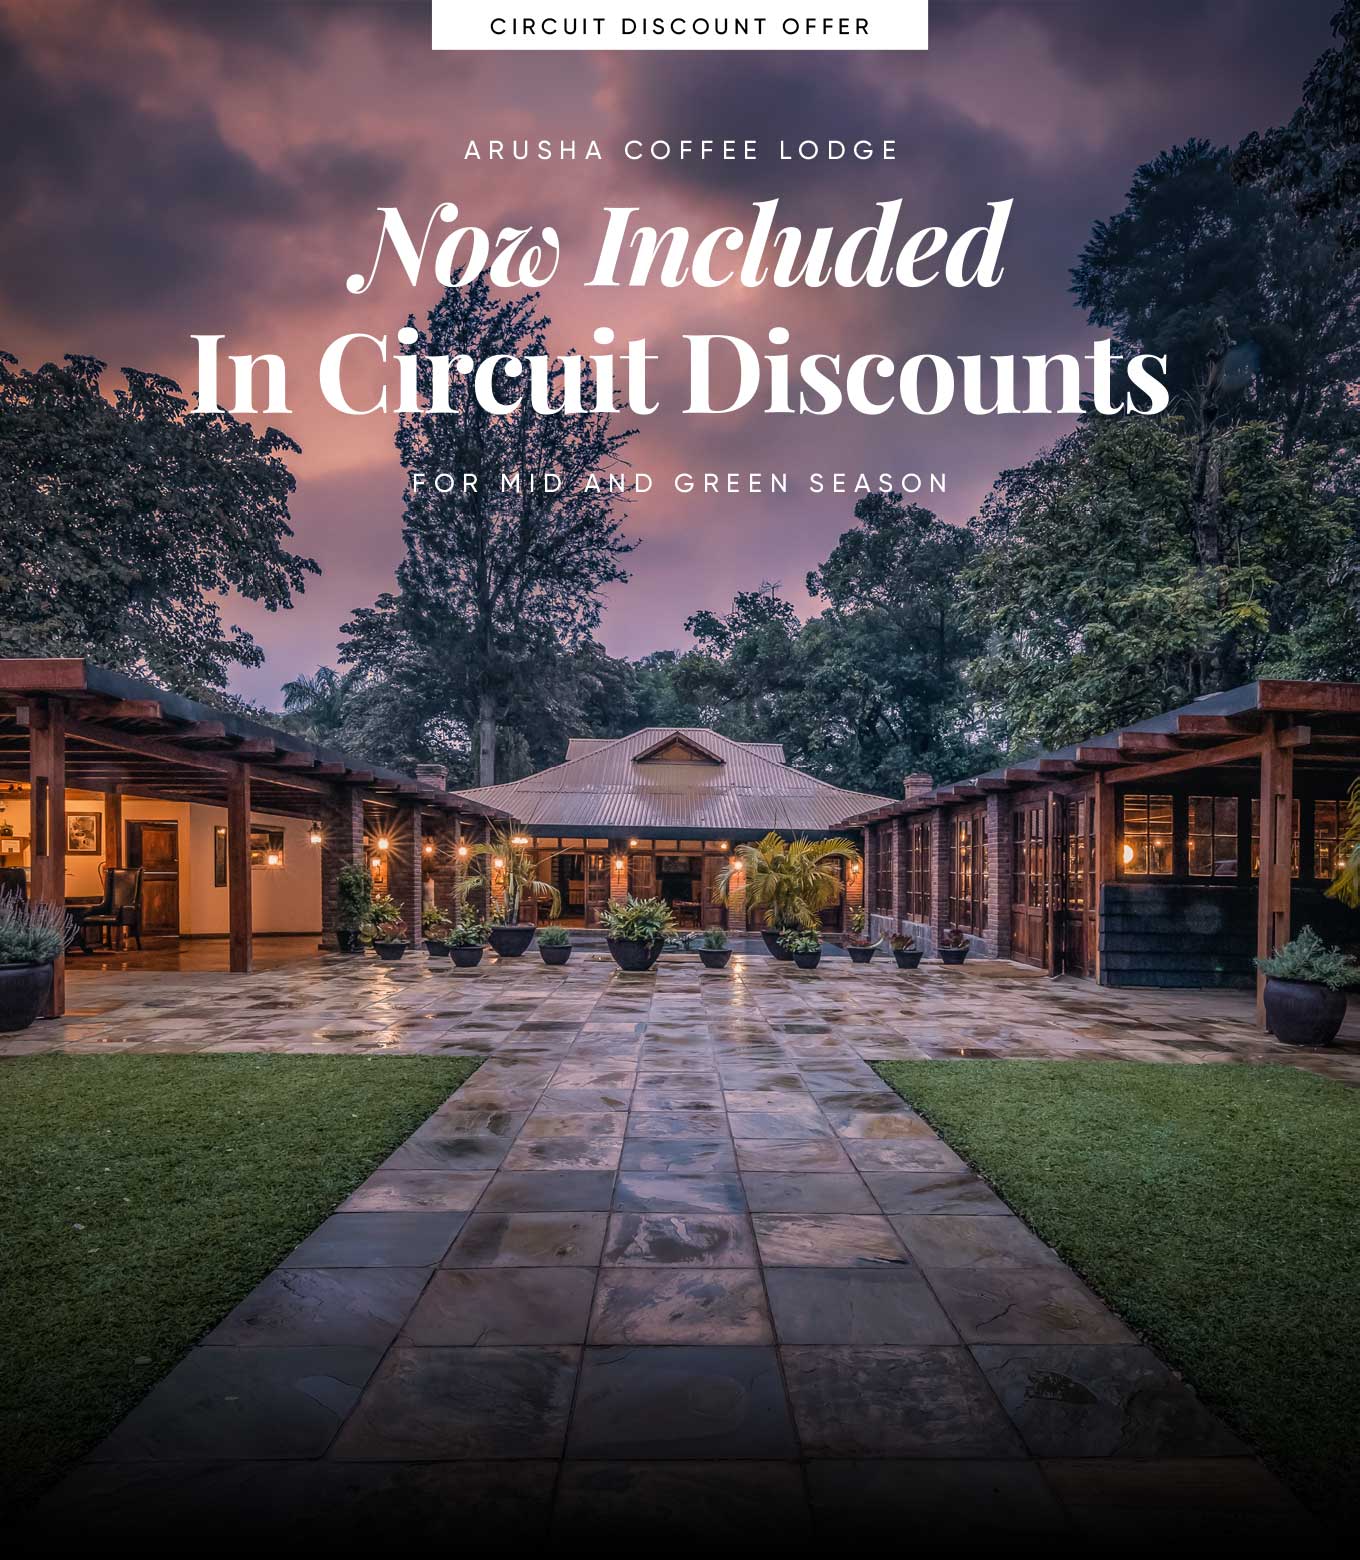 ACL Circuit Discounts mail